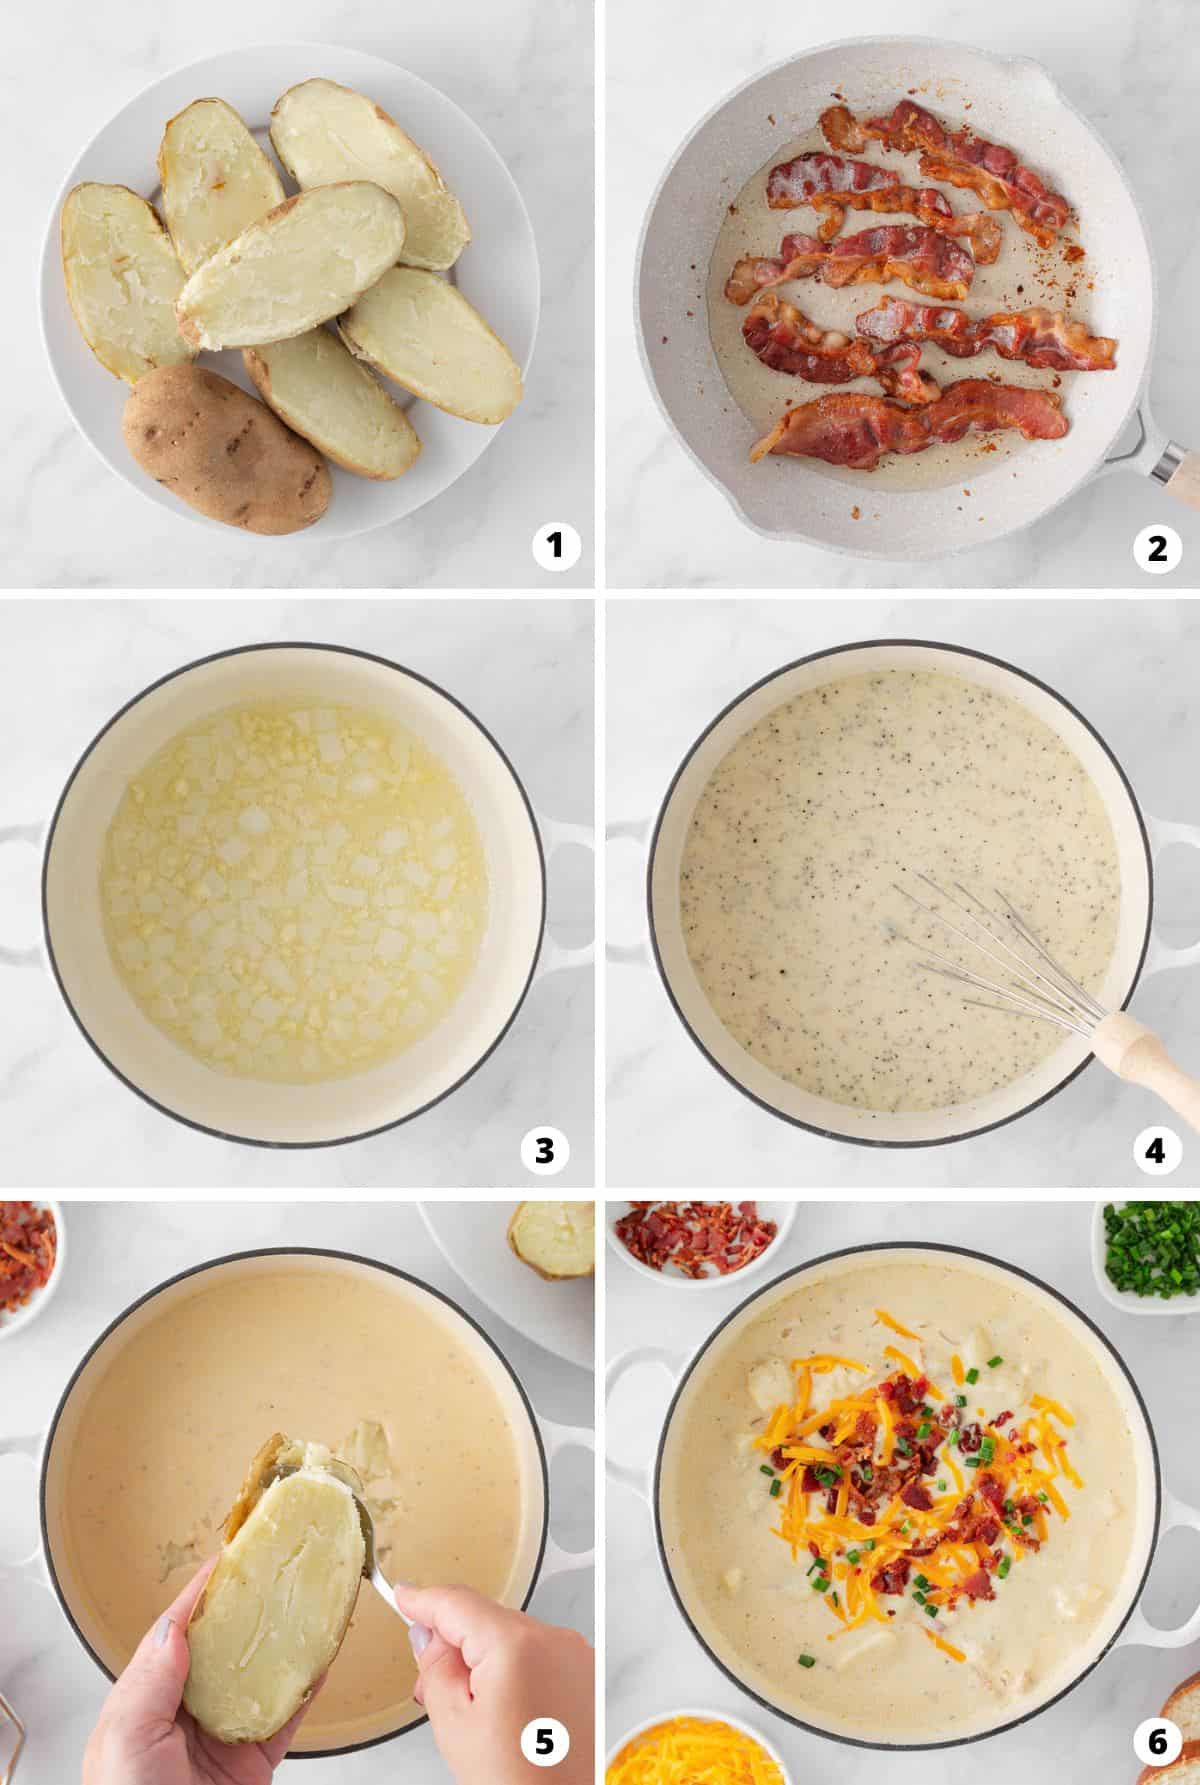 Showing how to make baked potato soup in a 6 step collage.